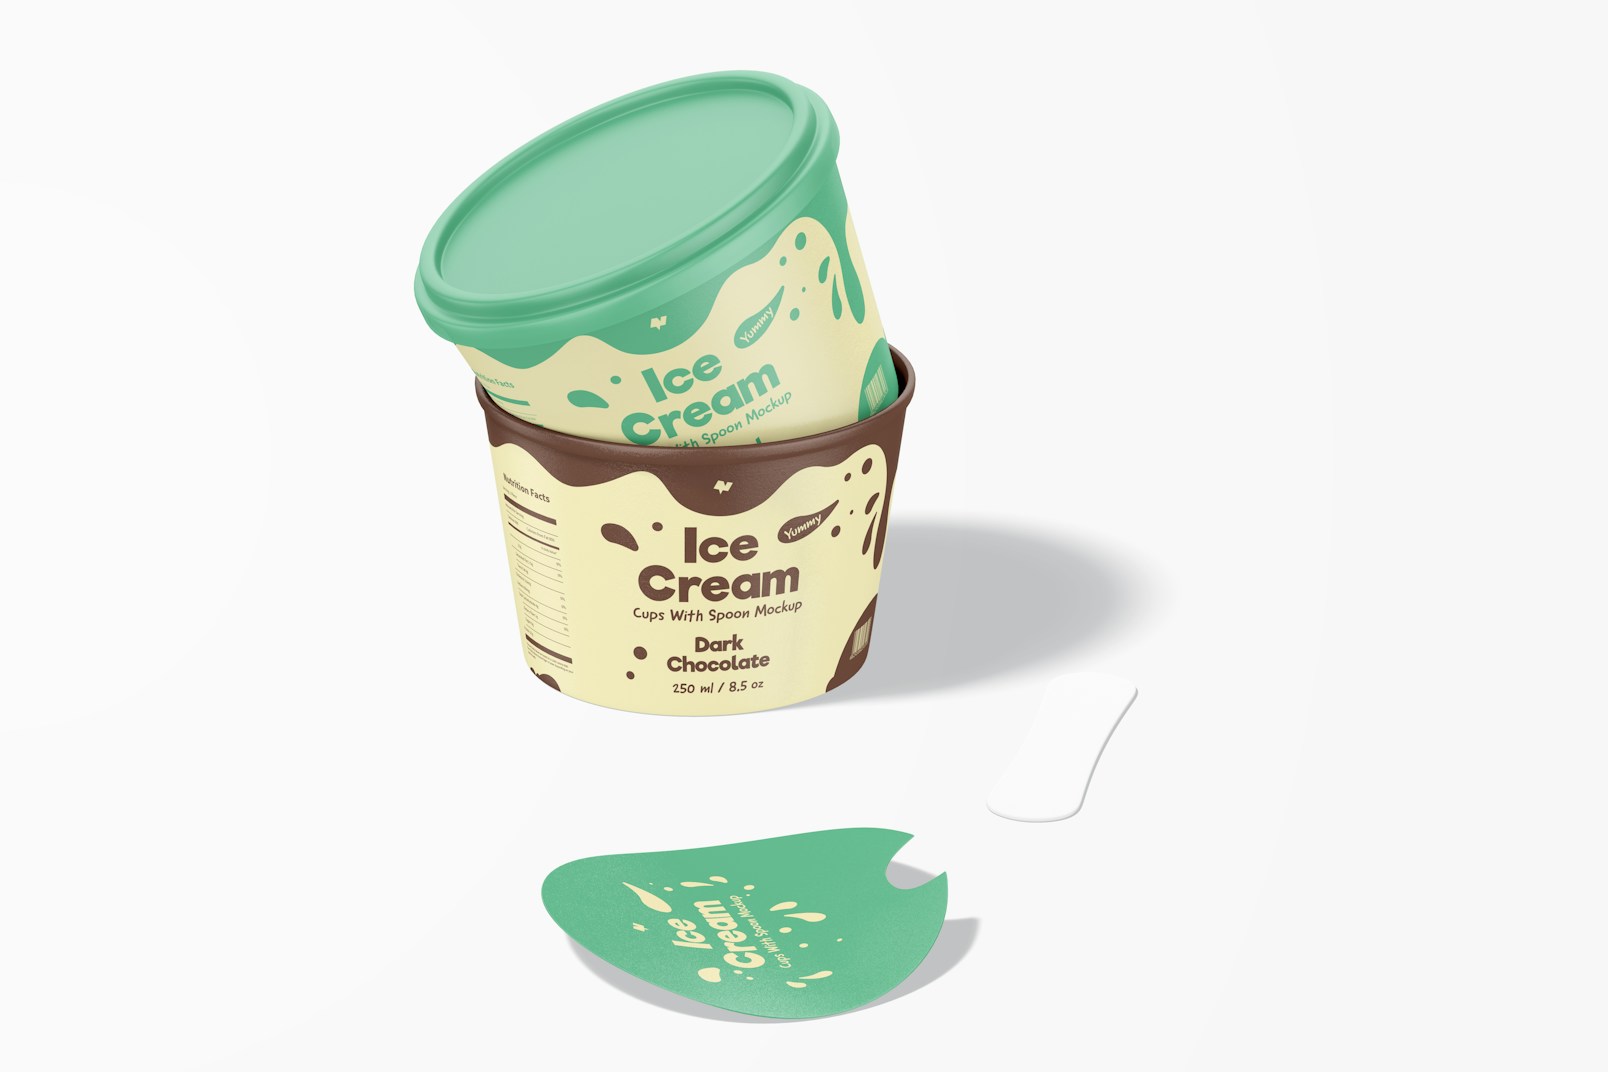 Ice Cream Cups With Spoon Mockup, Stacked